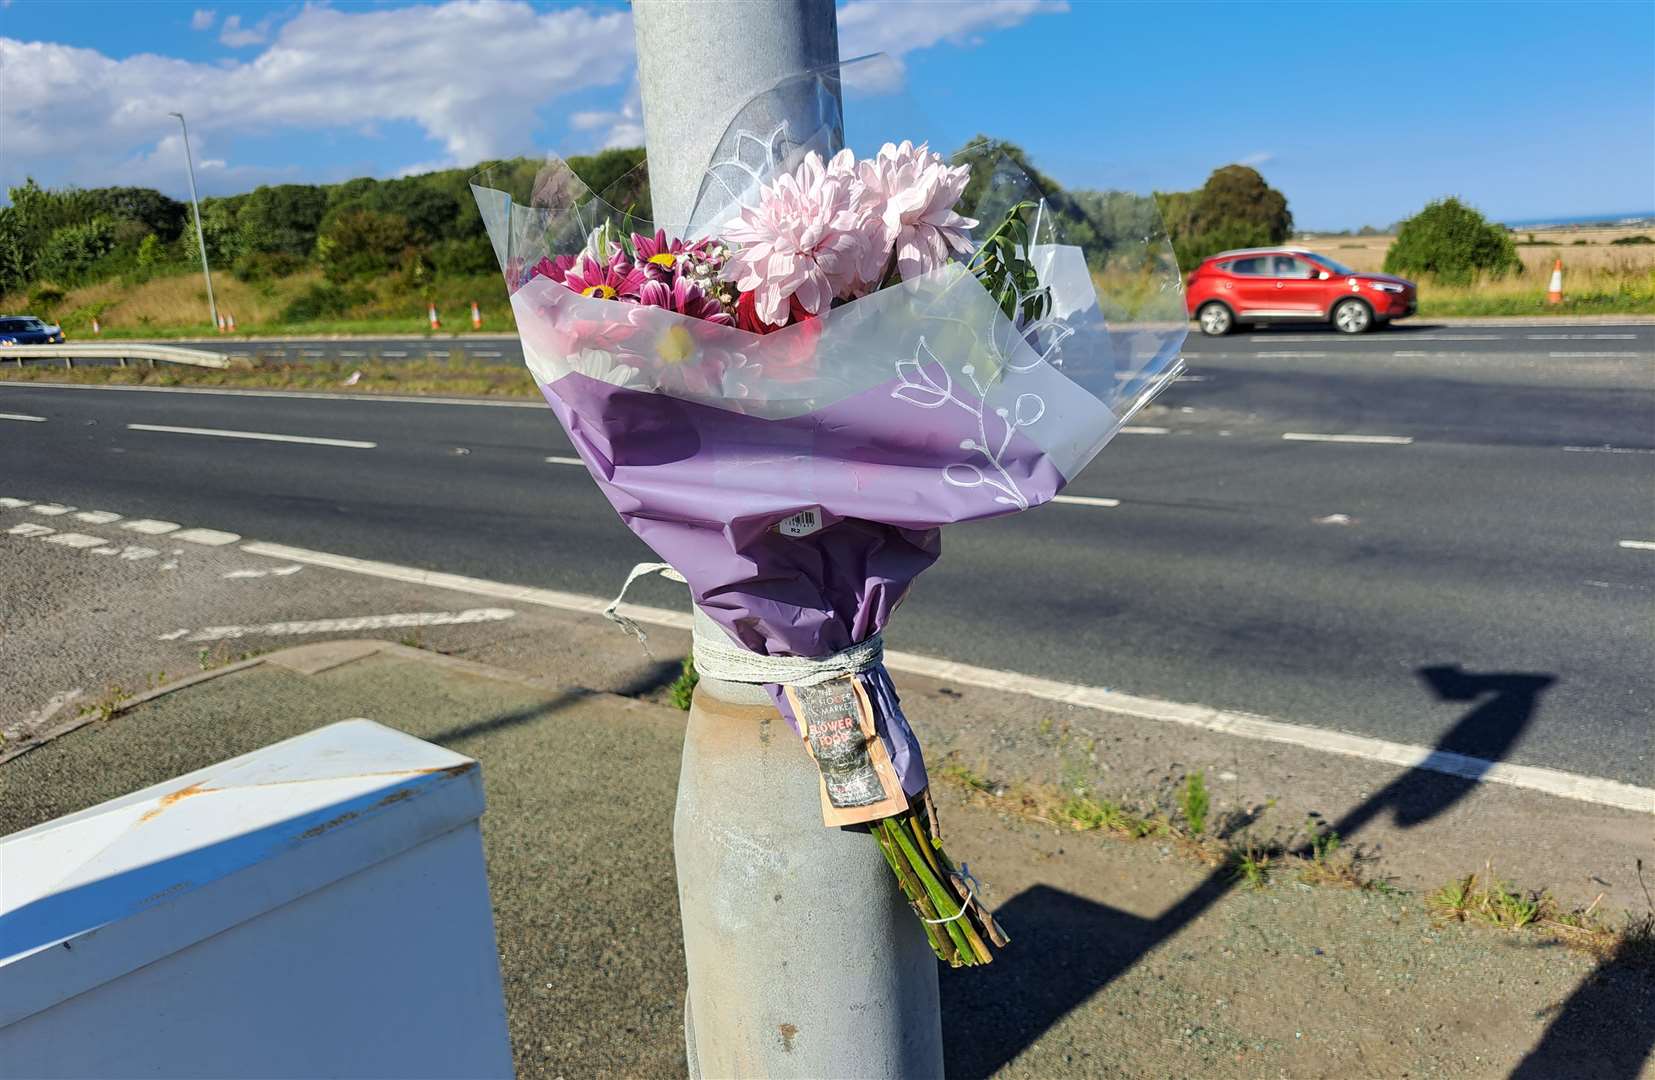 Flowers have been left at the scene following the crash on Sunday